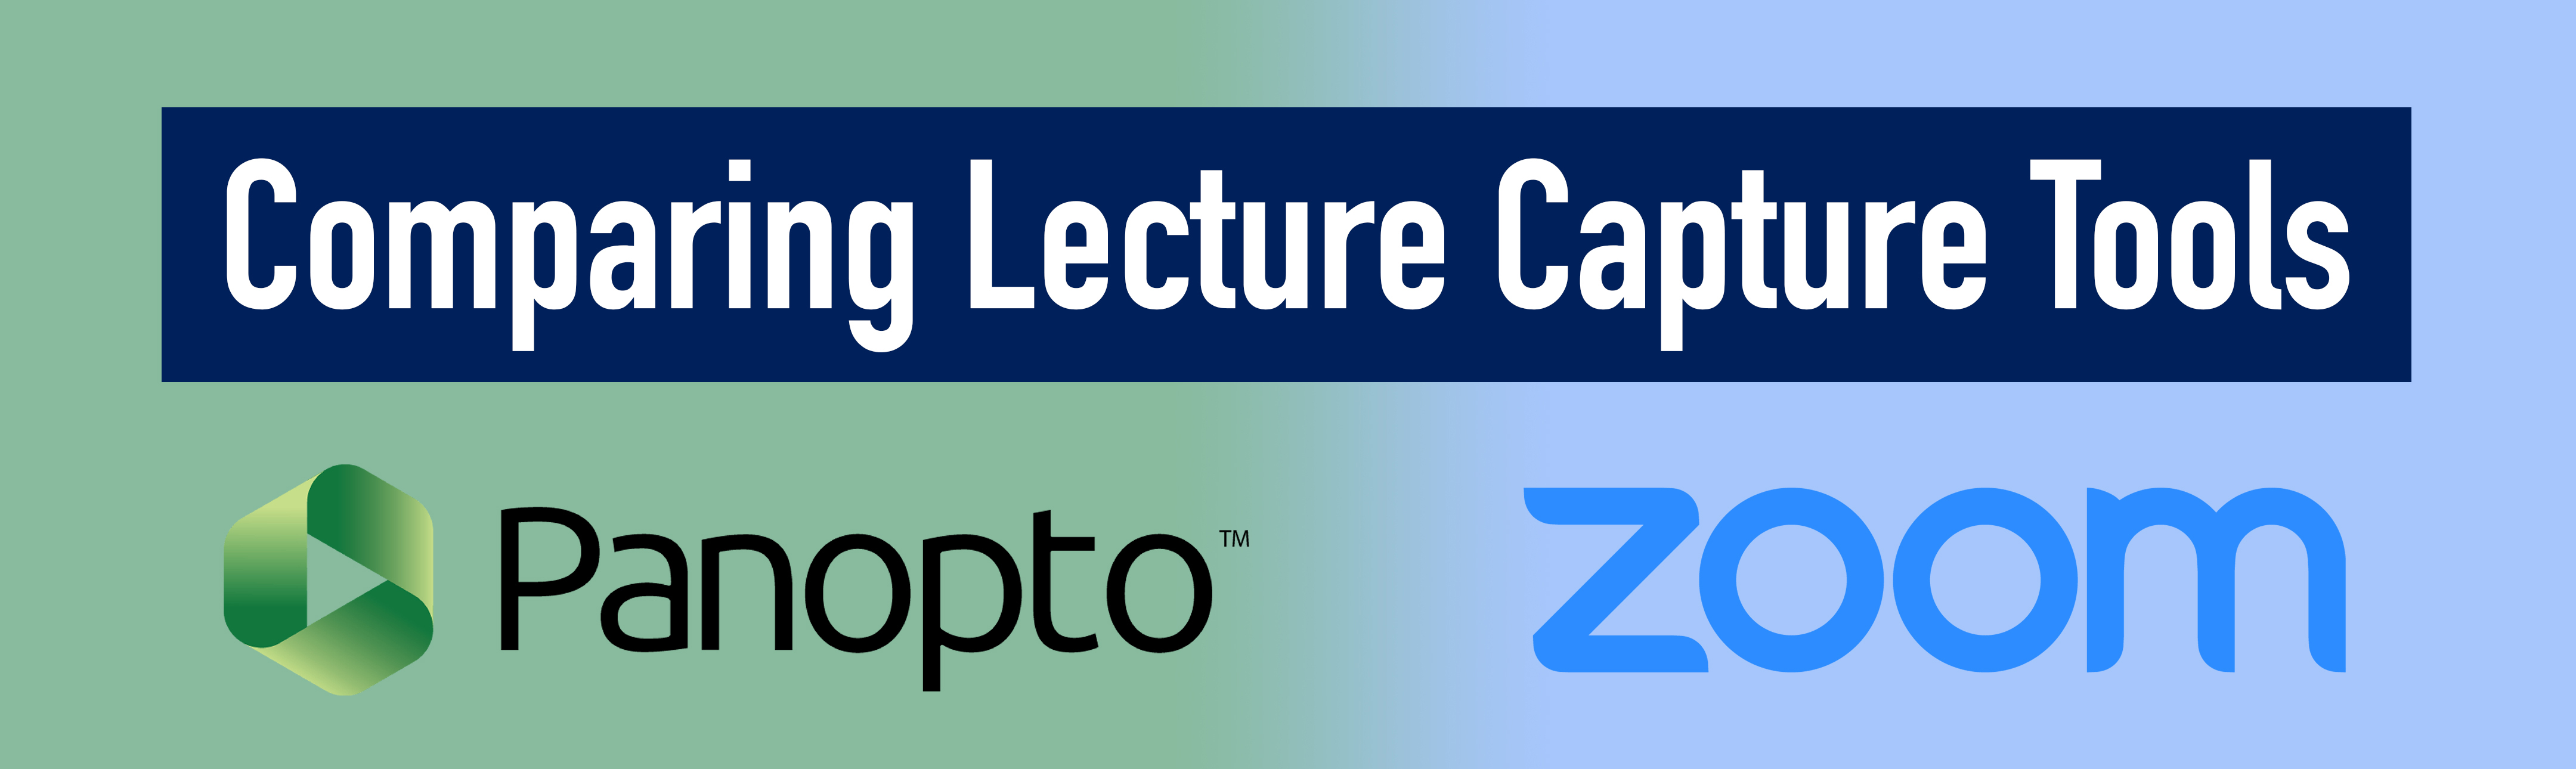 Comparing Lecture Capture Tools Panopto or Zoom